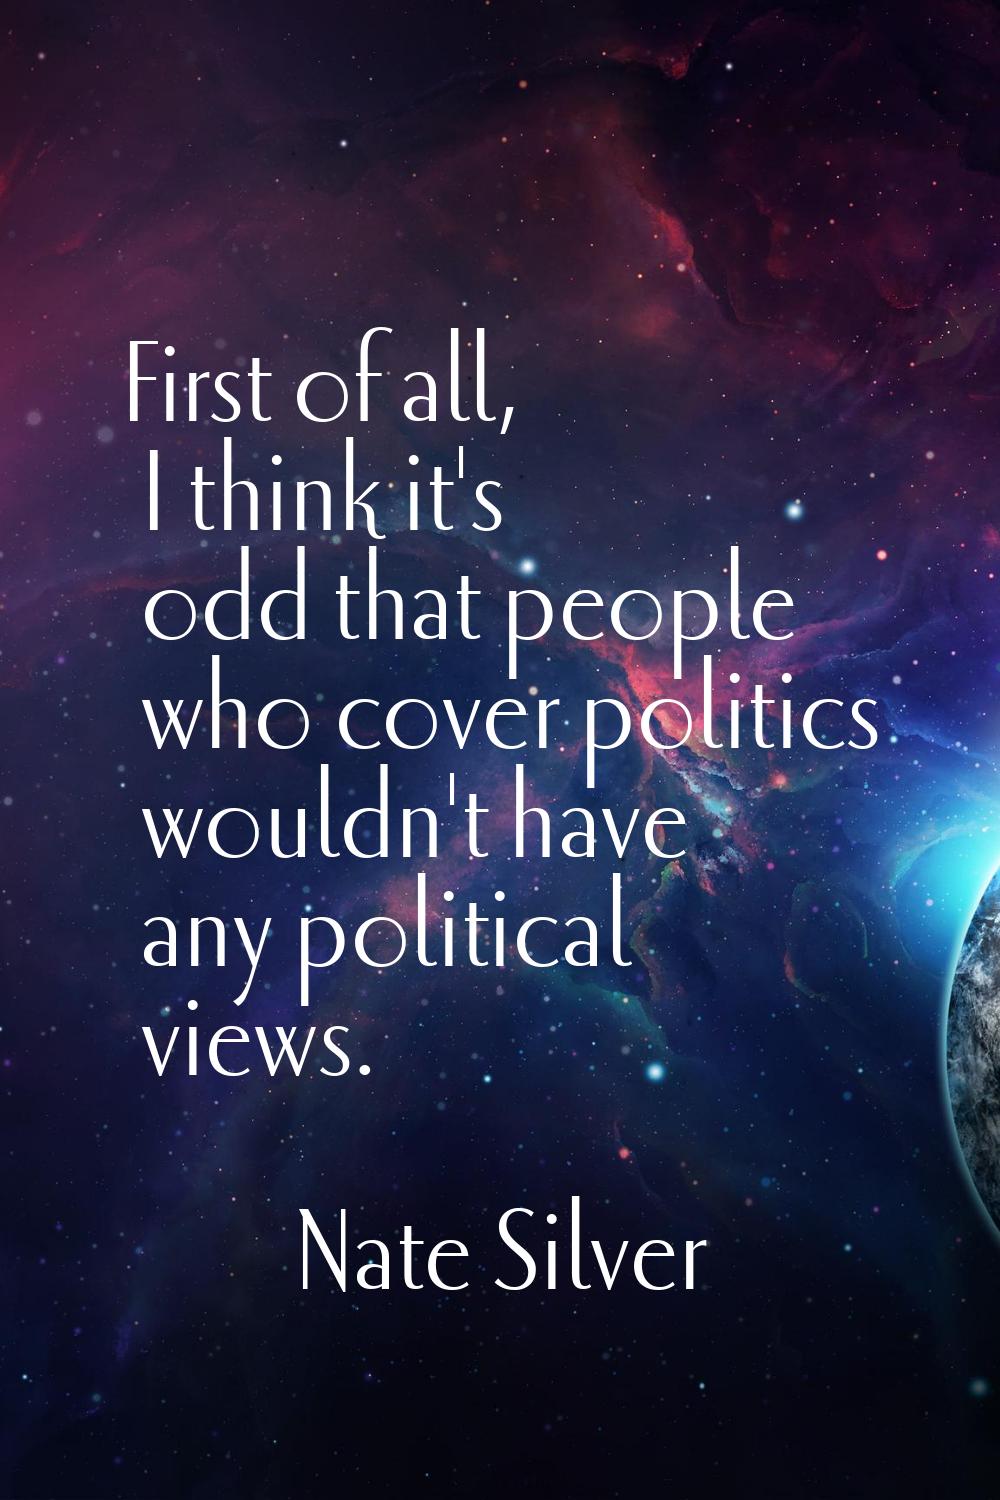 First of all, I think it's odd that people who cover politics wouldn't have any political views.